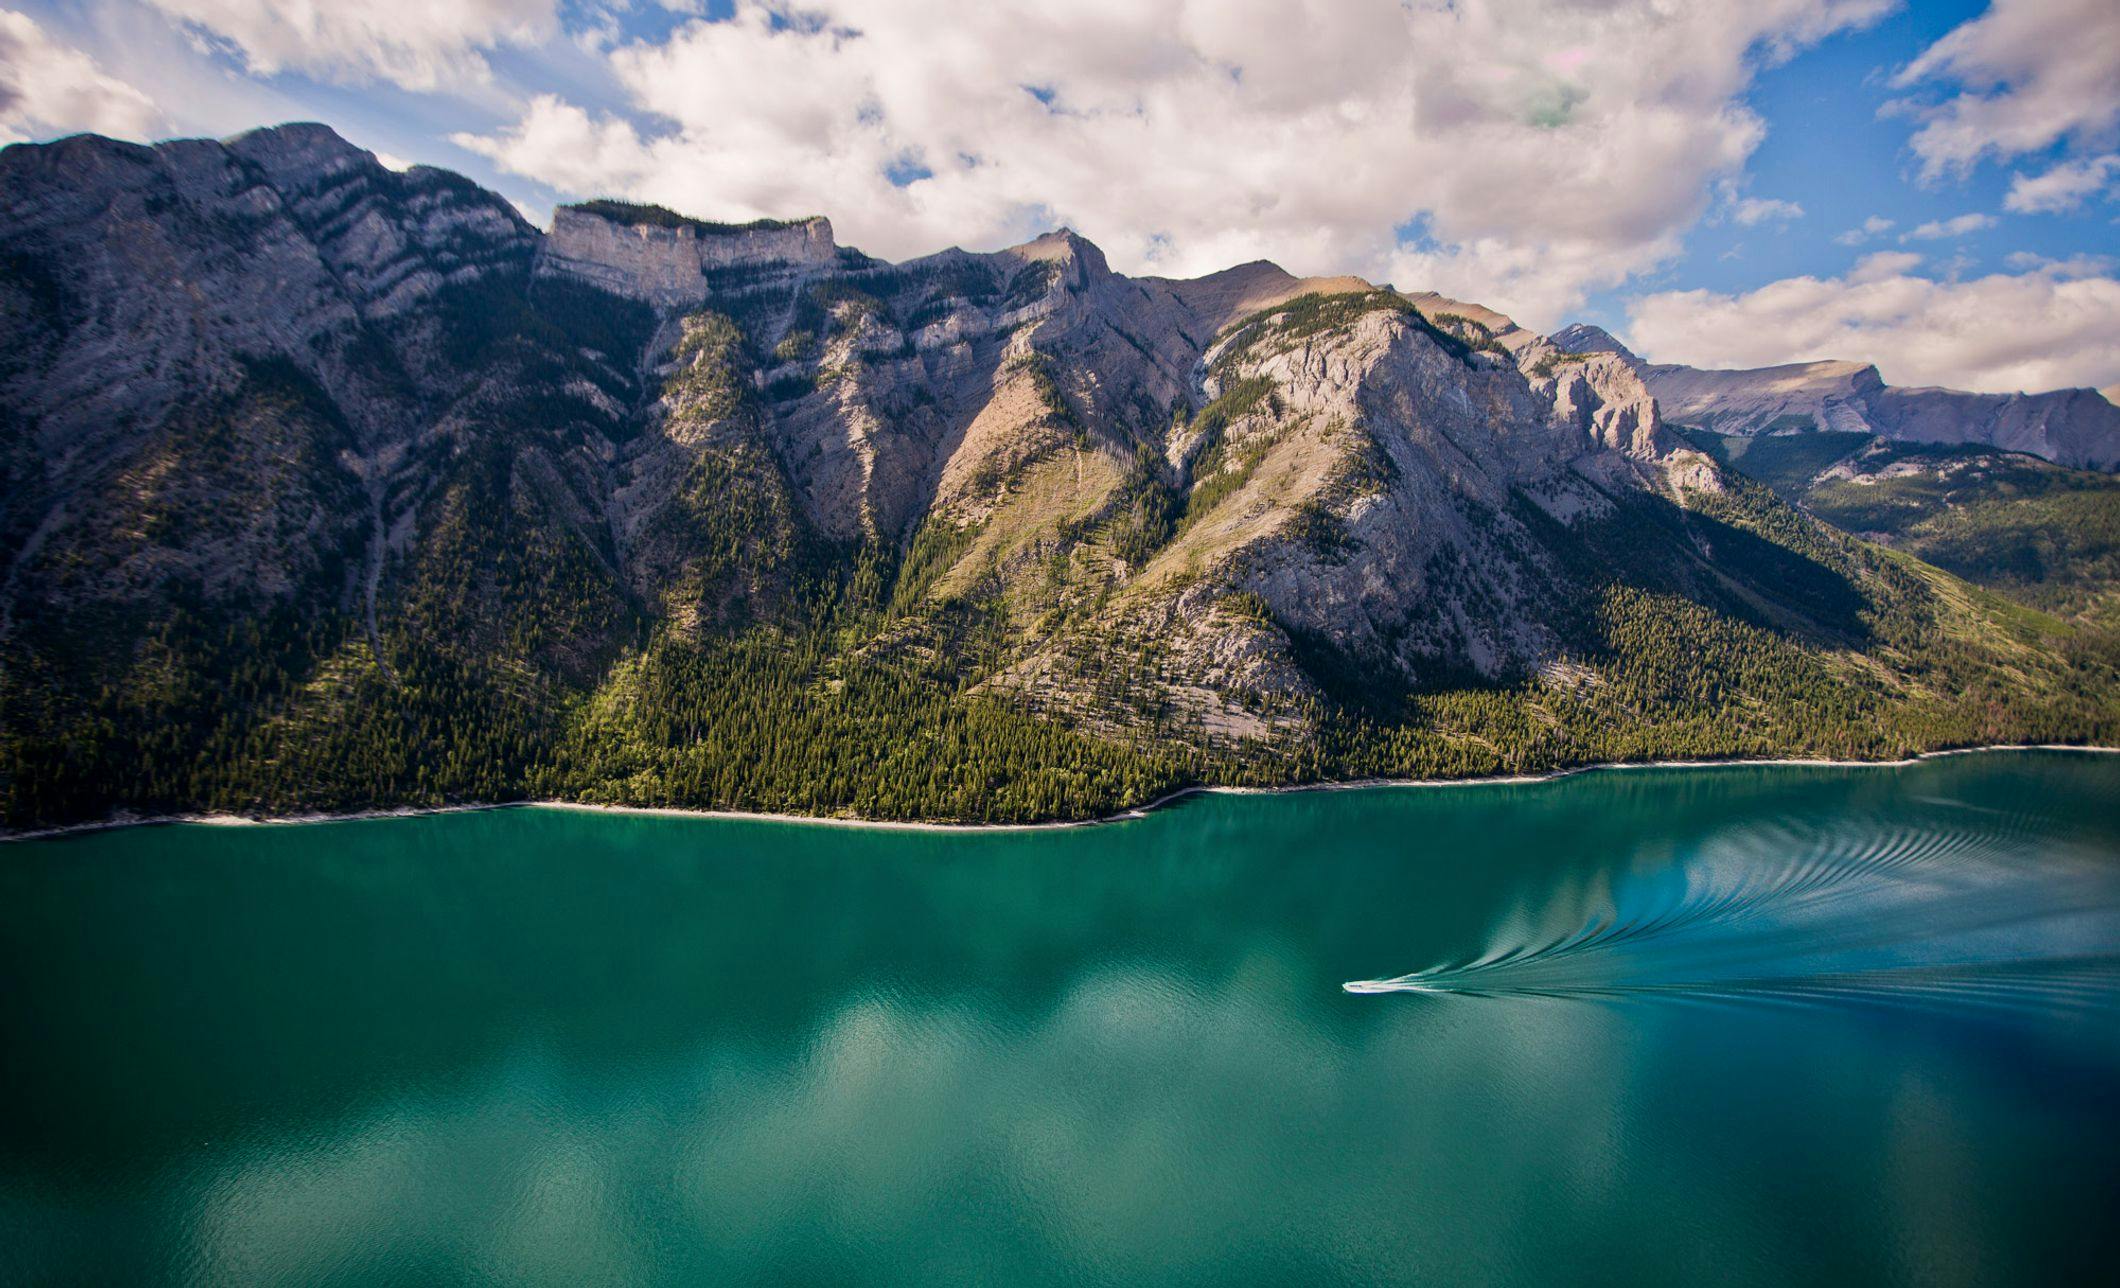 A boat tours the waters of Lake Minnewanka, Banff National Park, AB